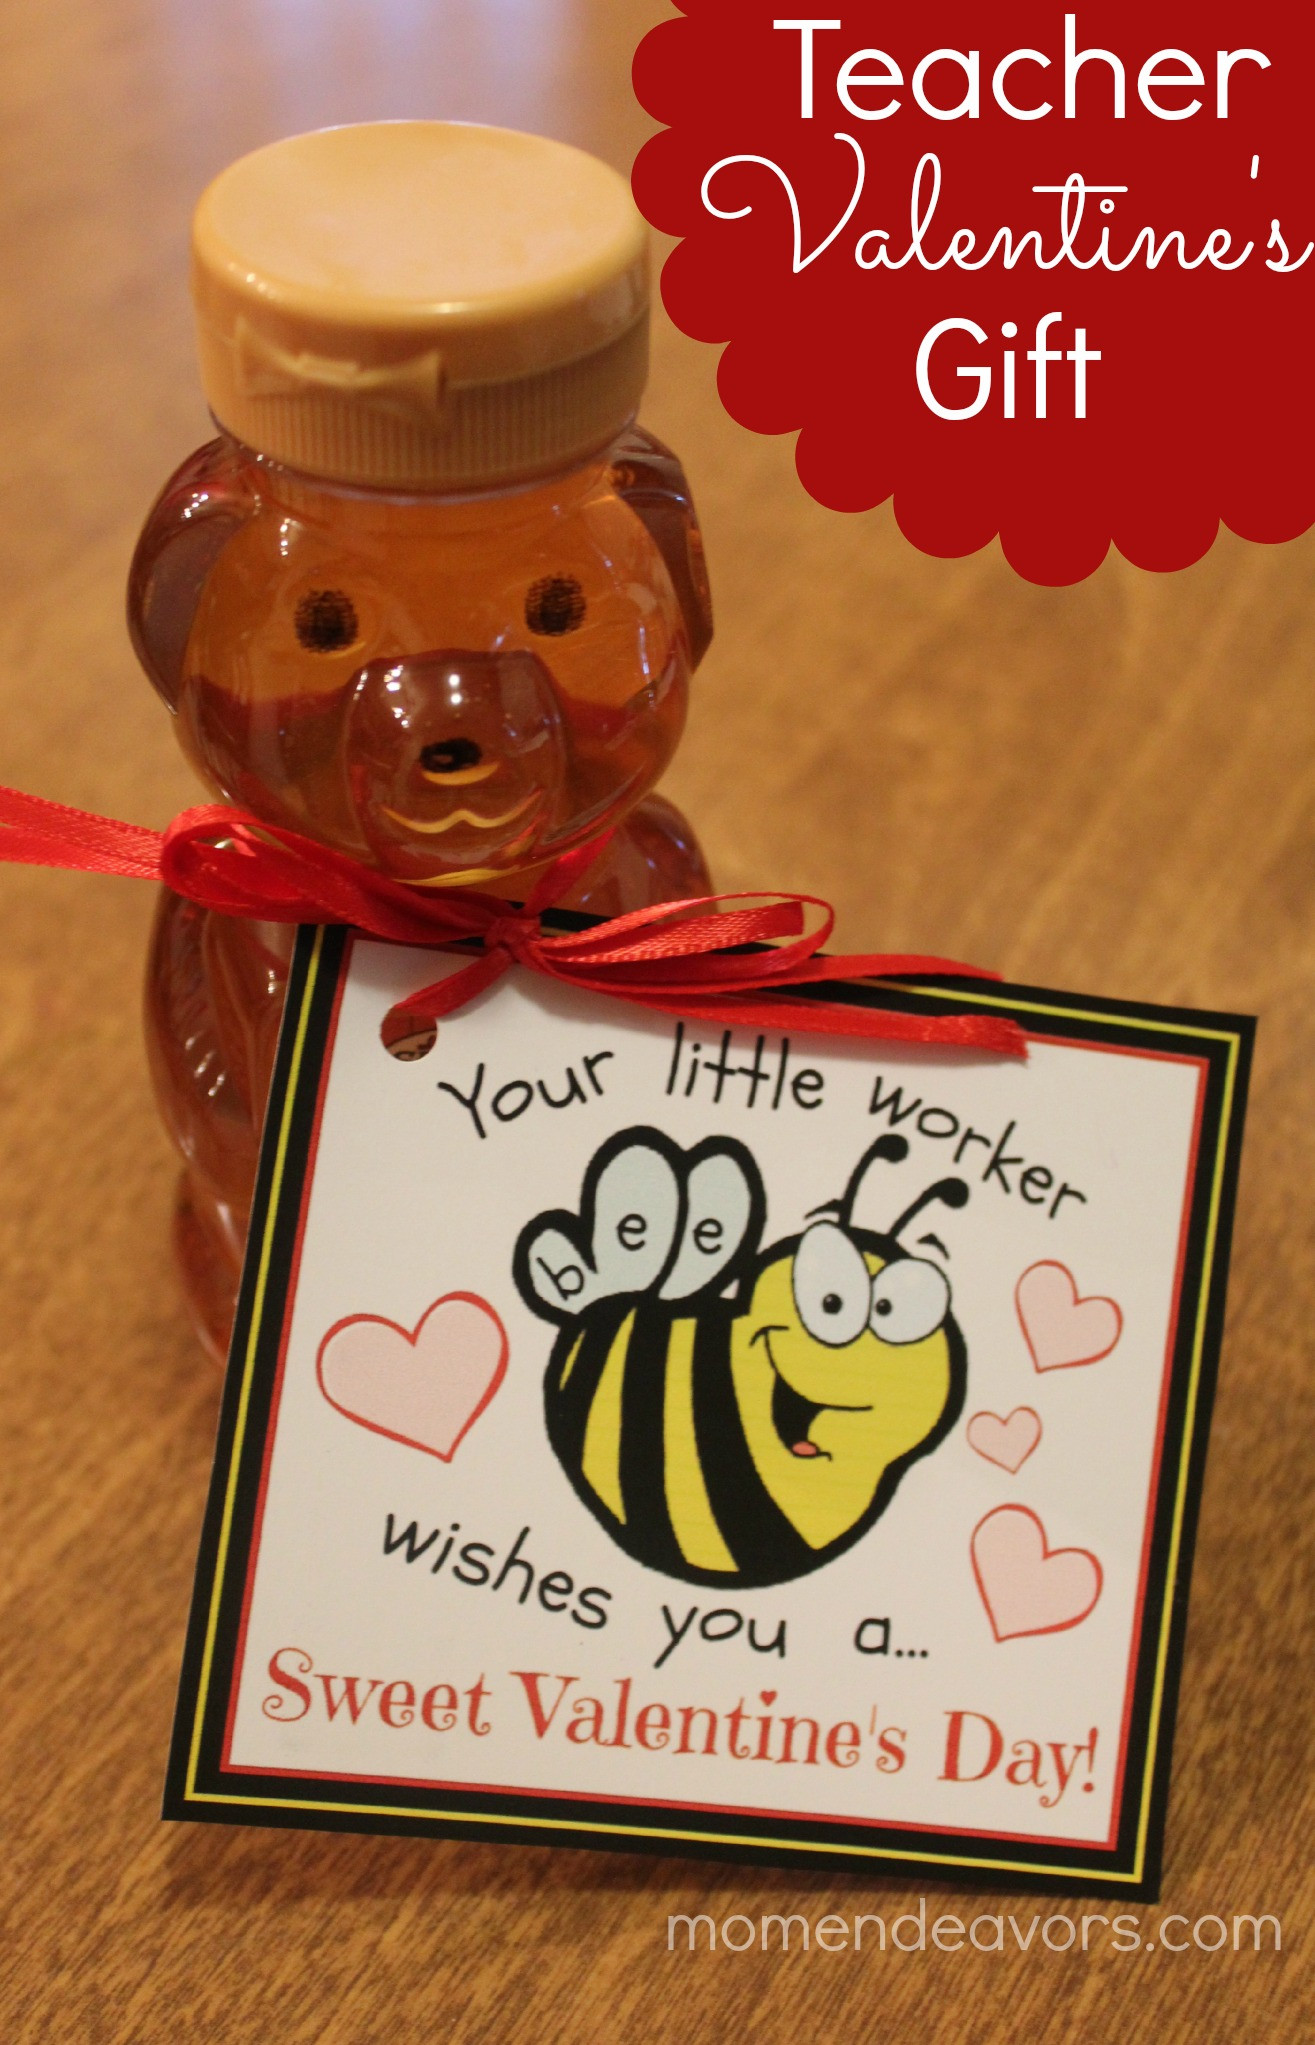 Valentines Day Gifts For Teachers
 Bee themed Teacher Valentine’s Gift